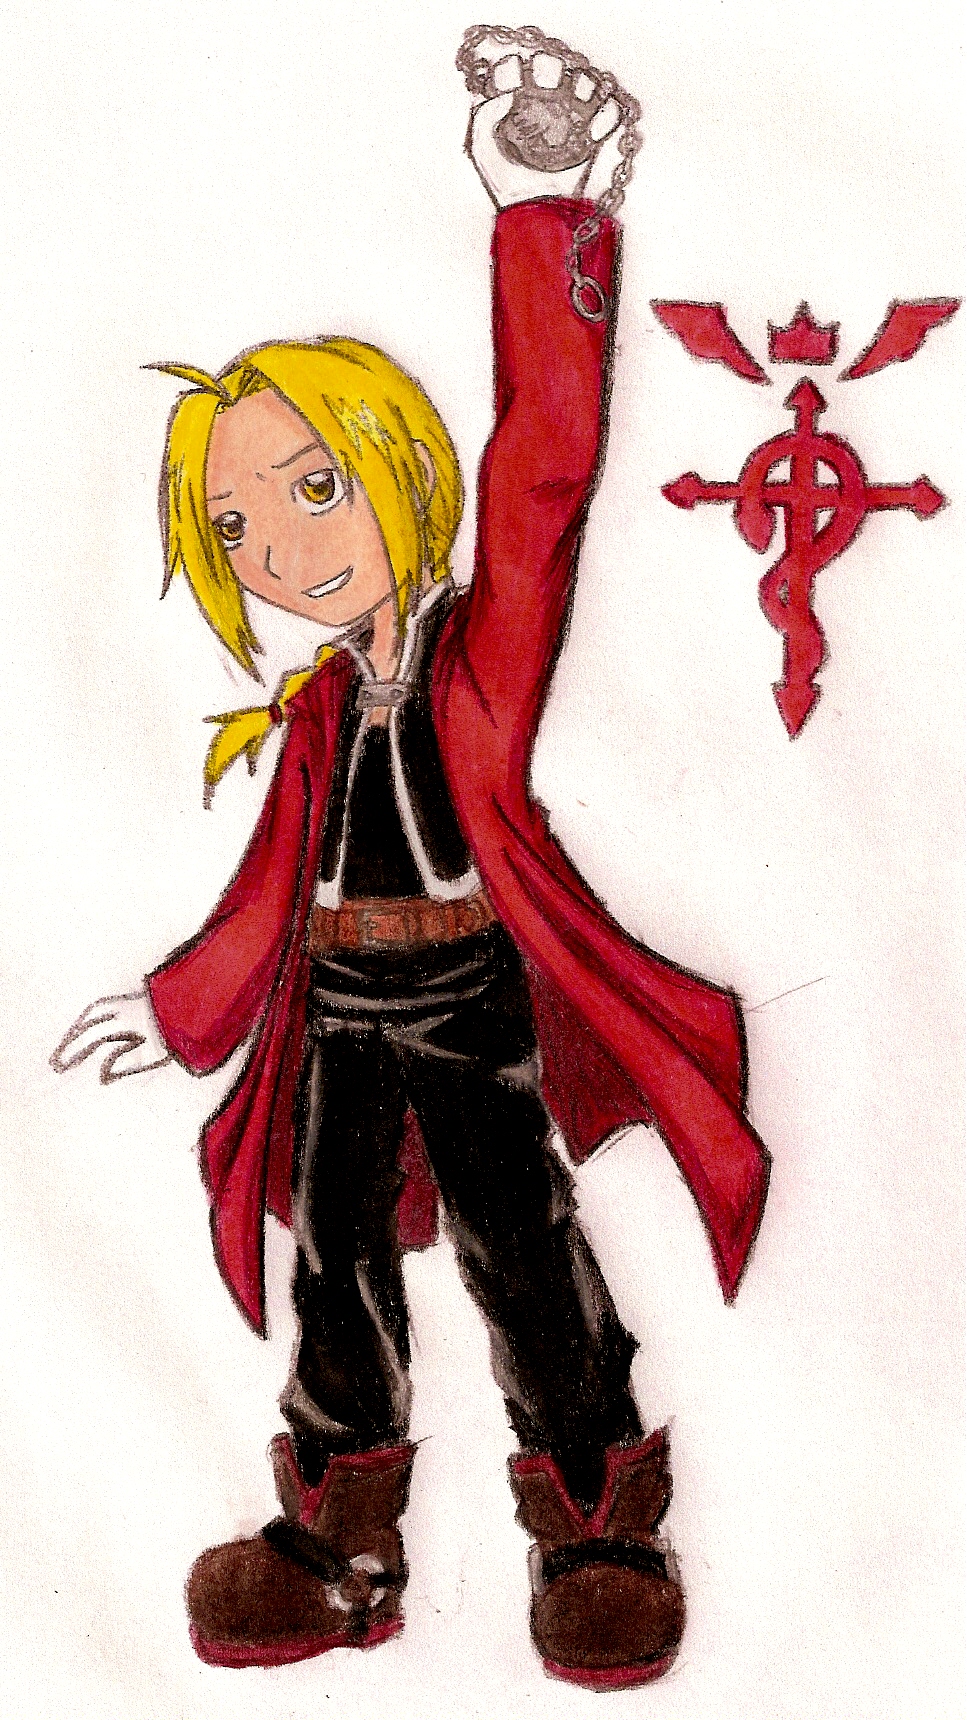 Edward Elric by mystic_rat_theif